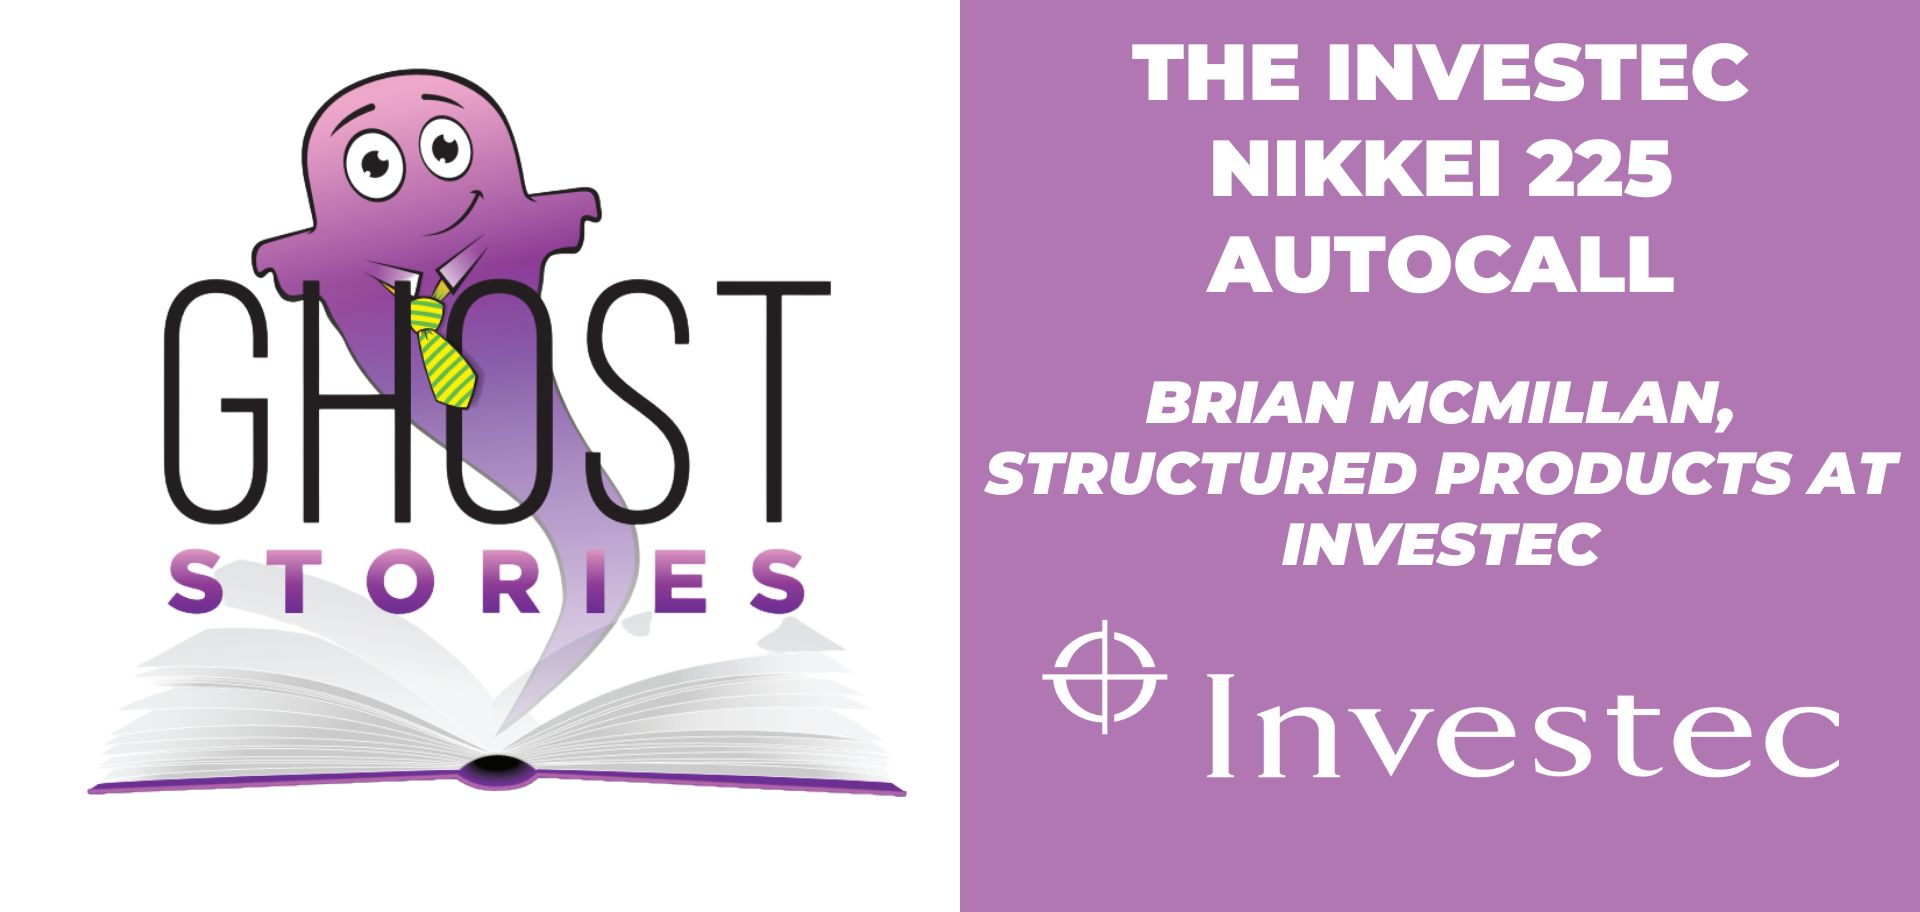 Ghost Stories #32: The Investec Nikkei 225 Autocall